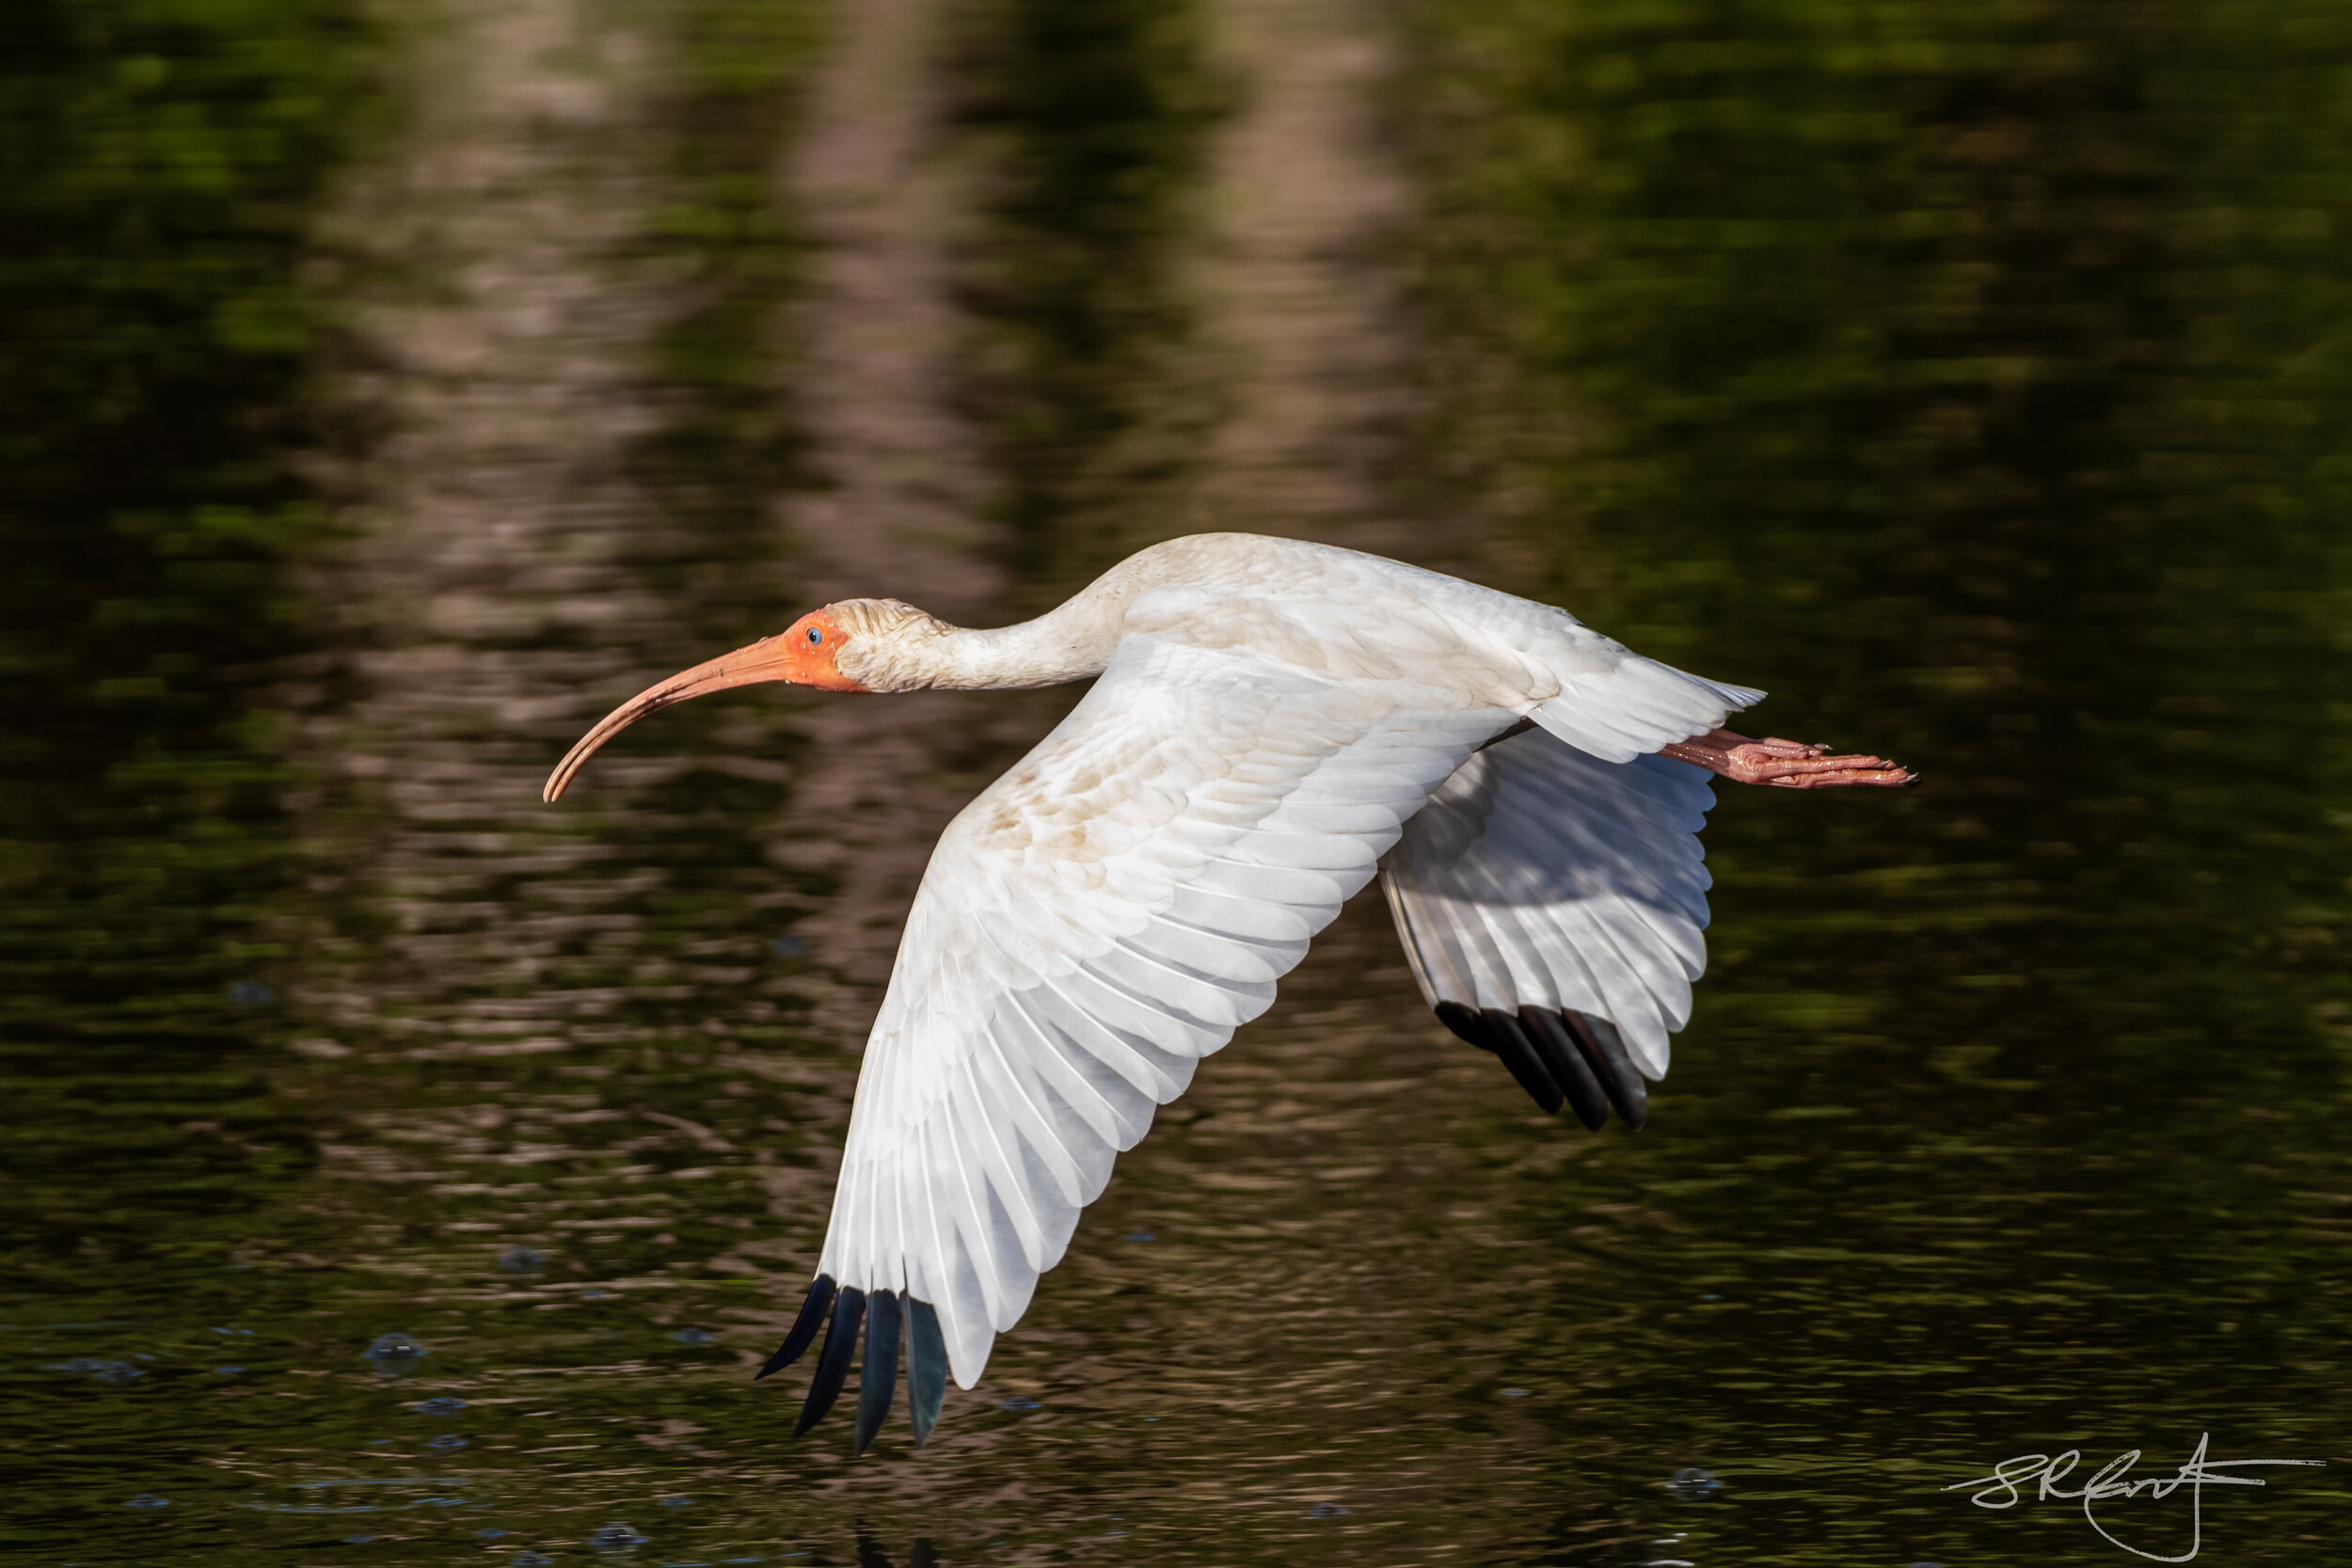 Meanwhile, back at the pond.... a White Ibis floats by.